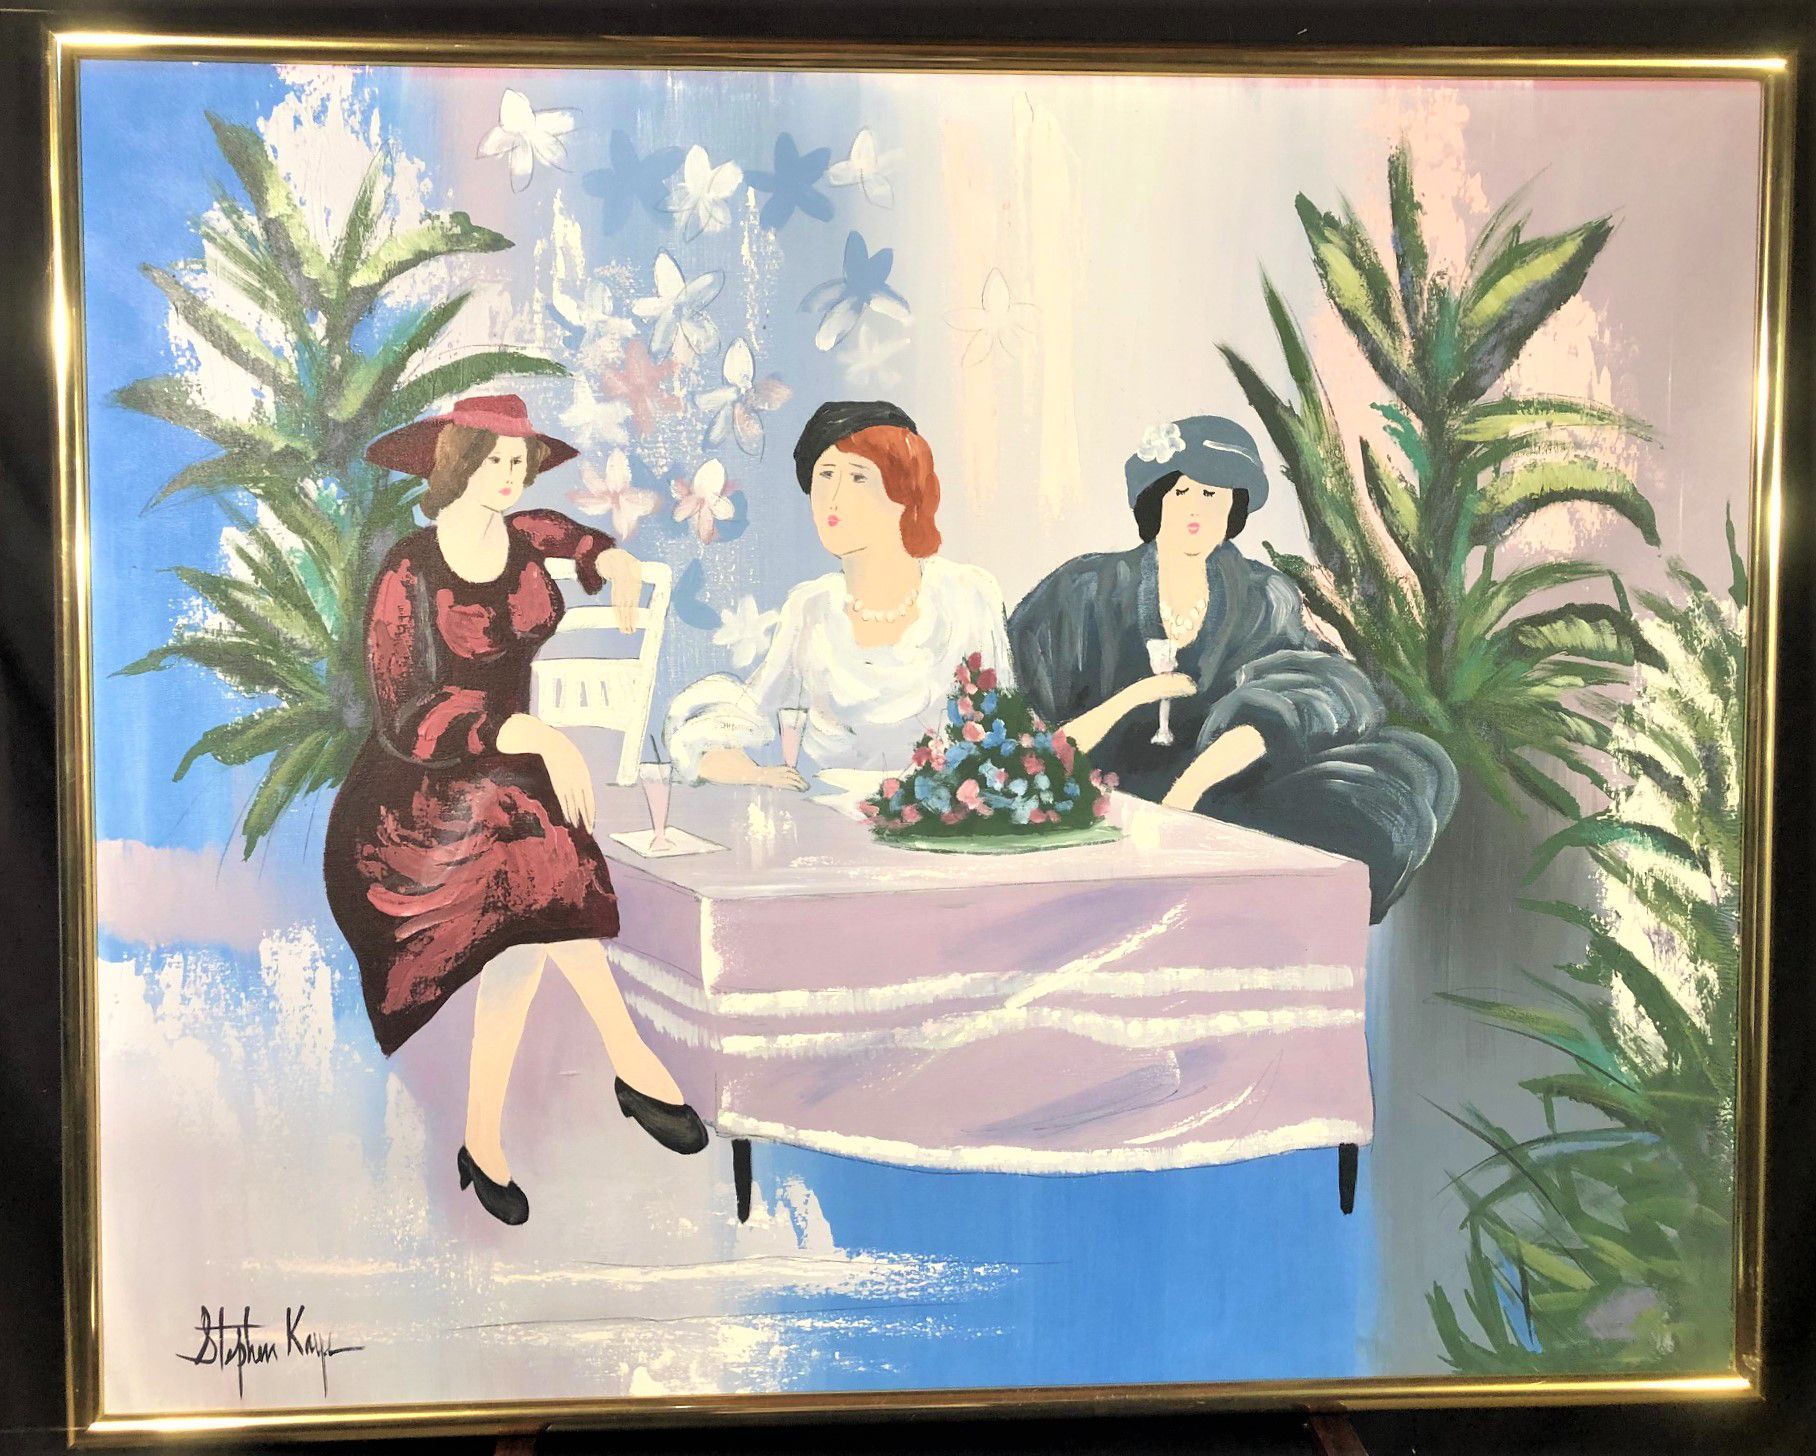 STEPHEN KAYE – ORIGINAL OIL PAINTING ON CANVAS – LADIES AT AN OUTDOOR CAFE – SIGNED WITH GOLD FRAME – 52” x 42”